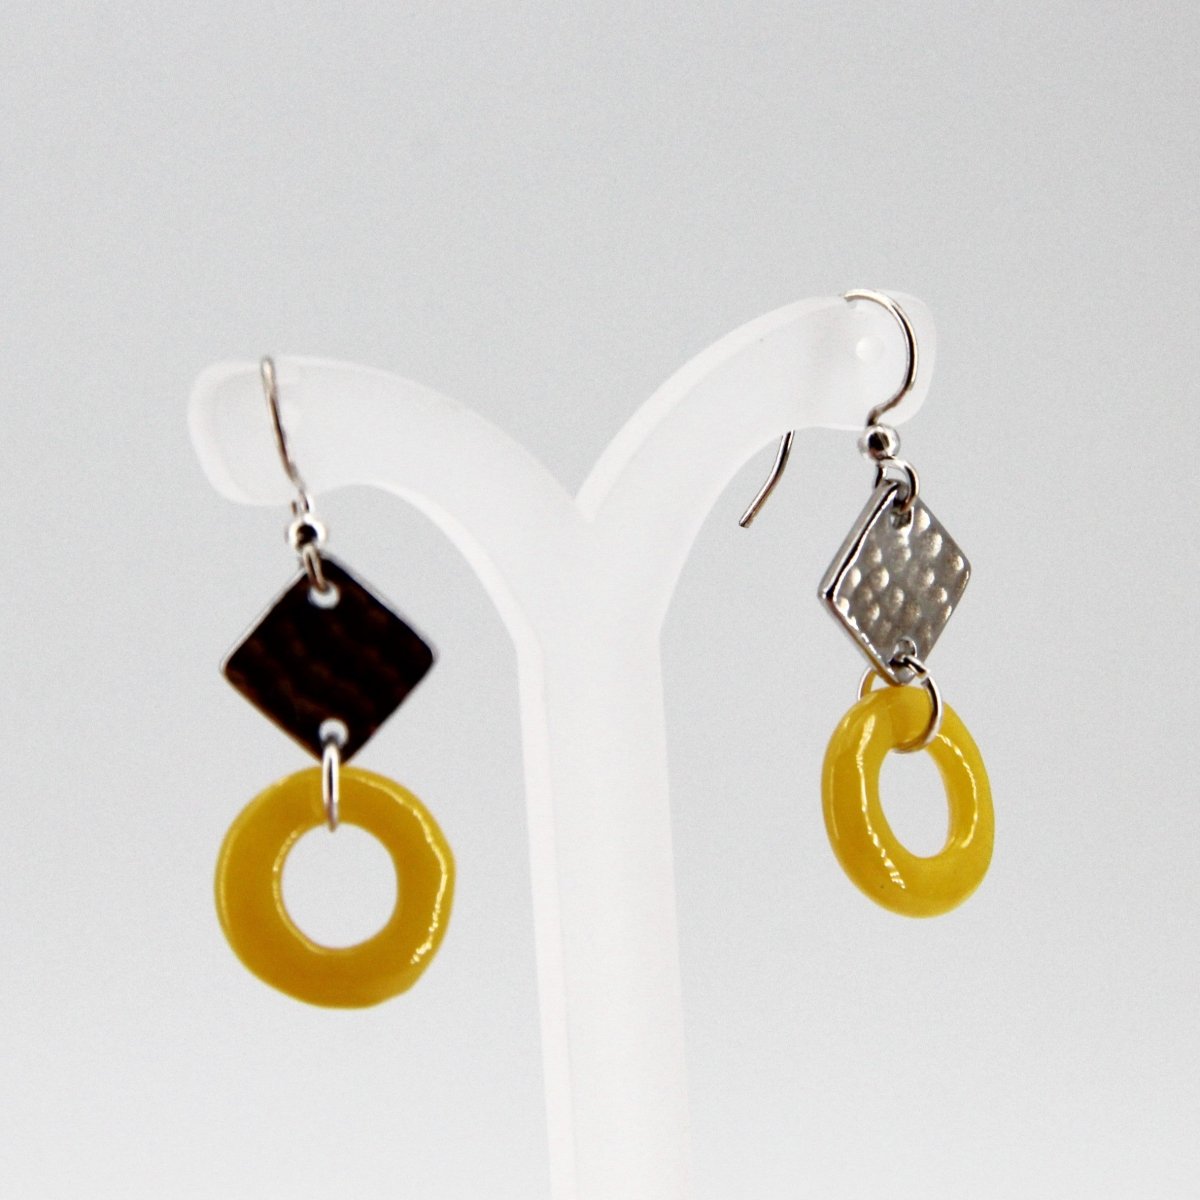 Yellow Glass Earrings with Silver Diamond Shaped Charm